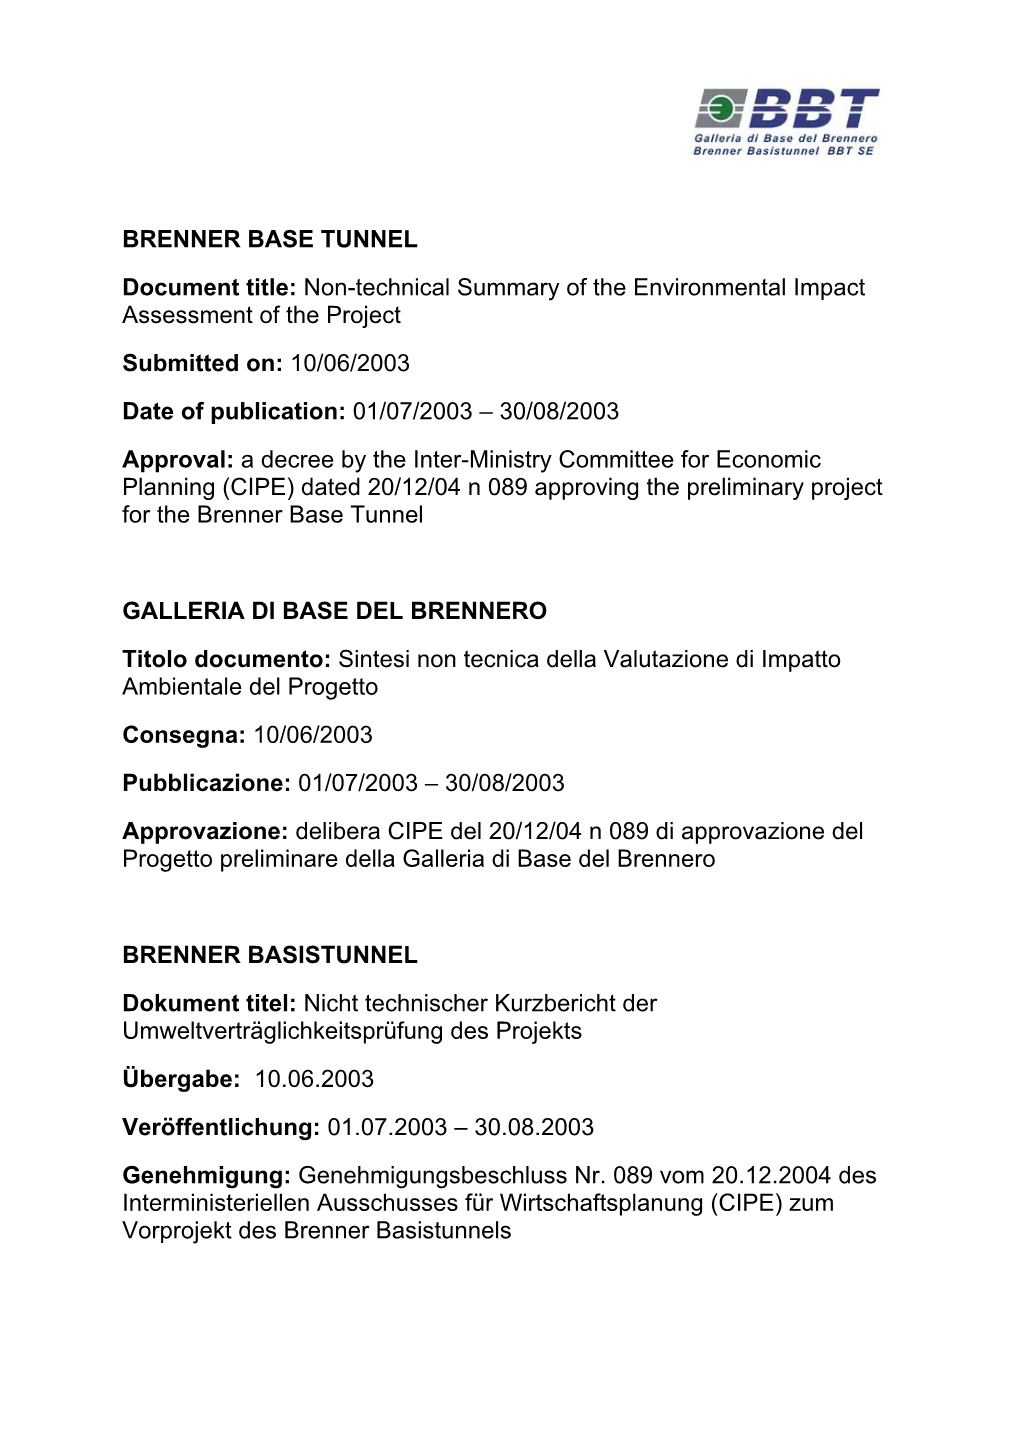 BRENNER BASE TUNNEL Document Title: Non-Technical Summary of The